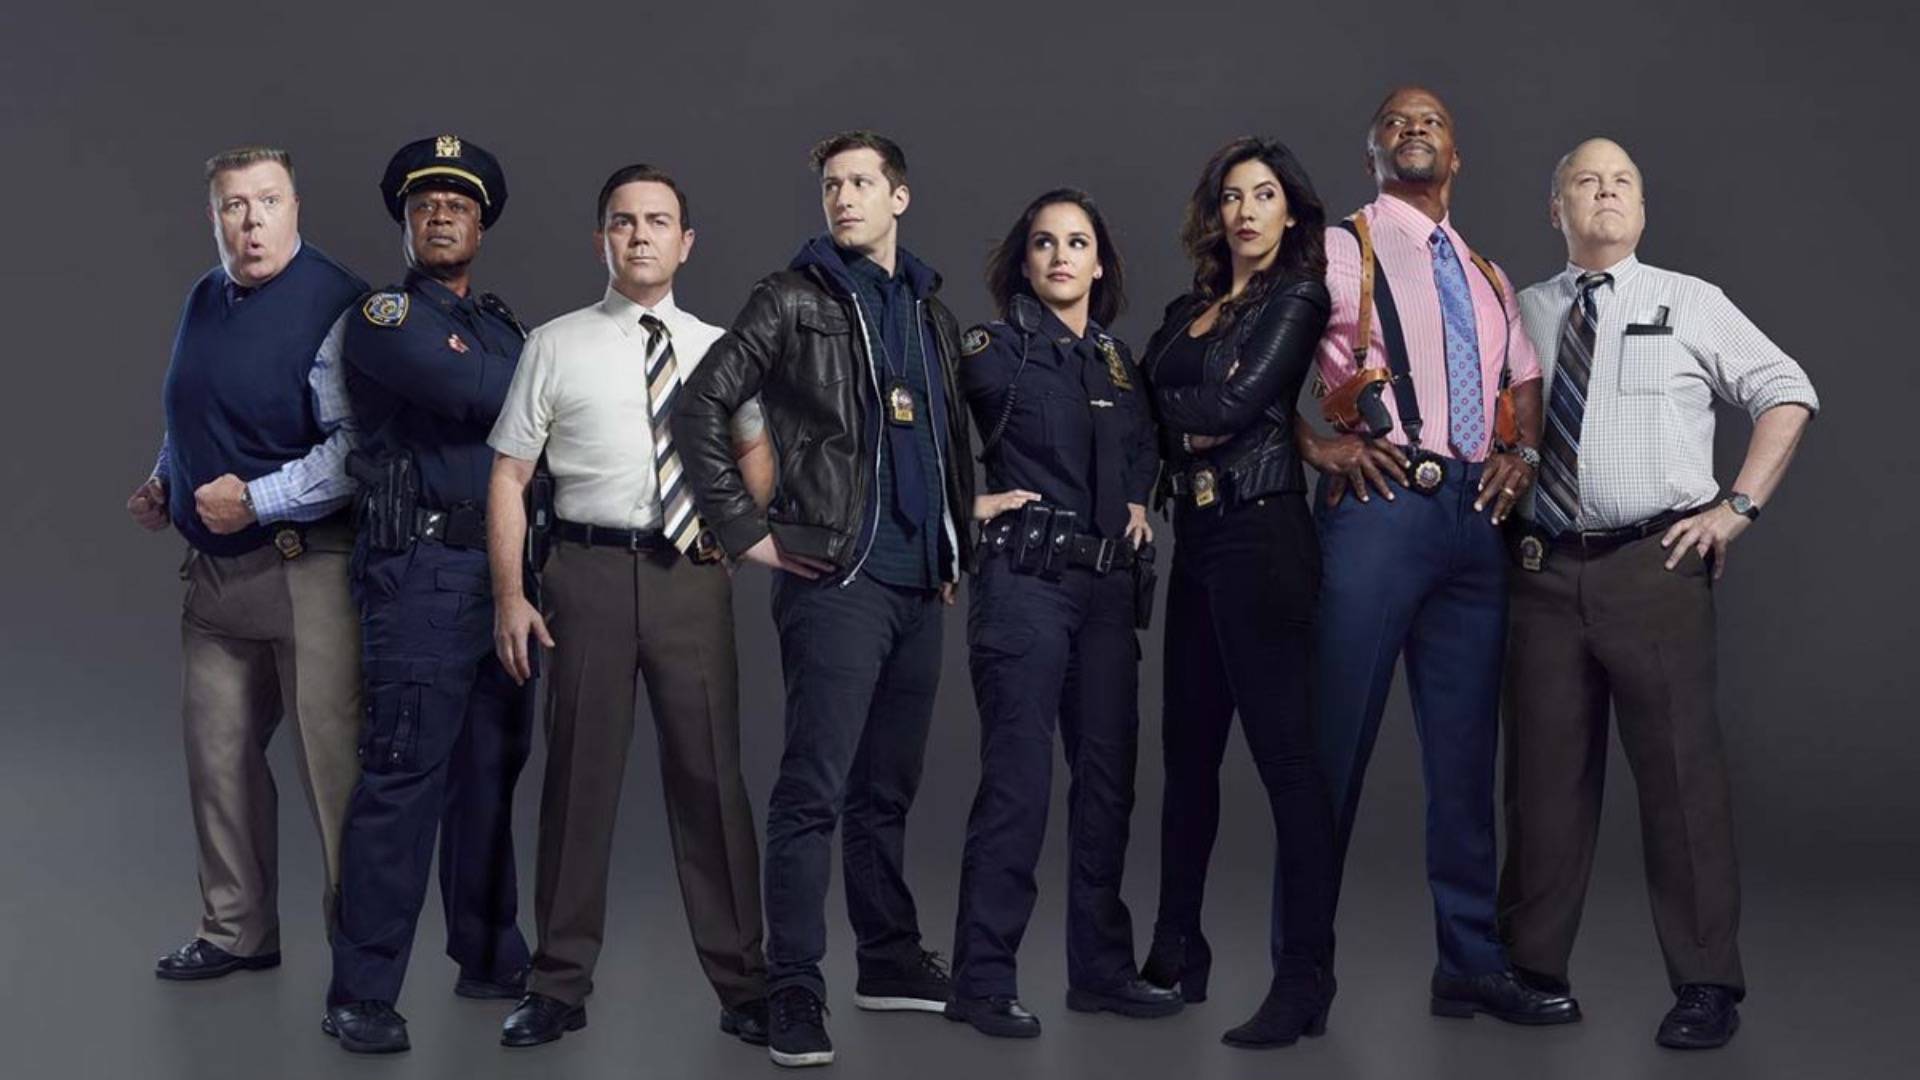 Cast Of Brooklyn 99 Posing In Front Of Dark Grey Background